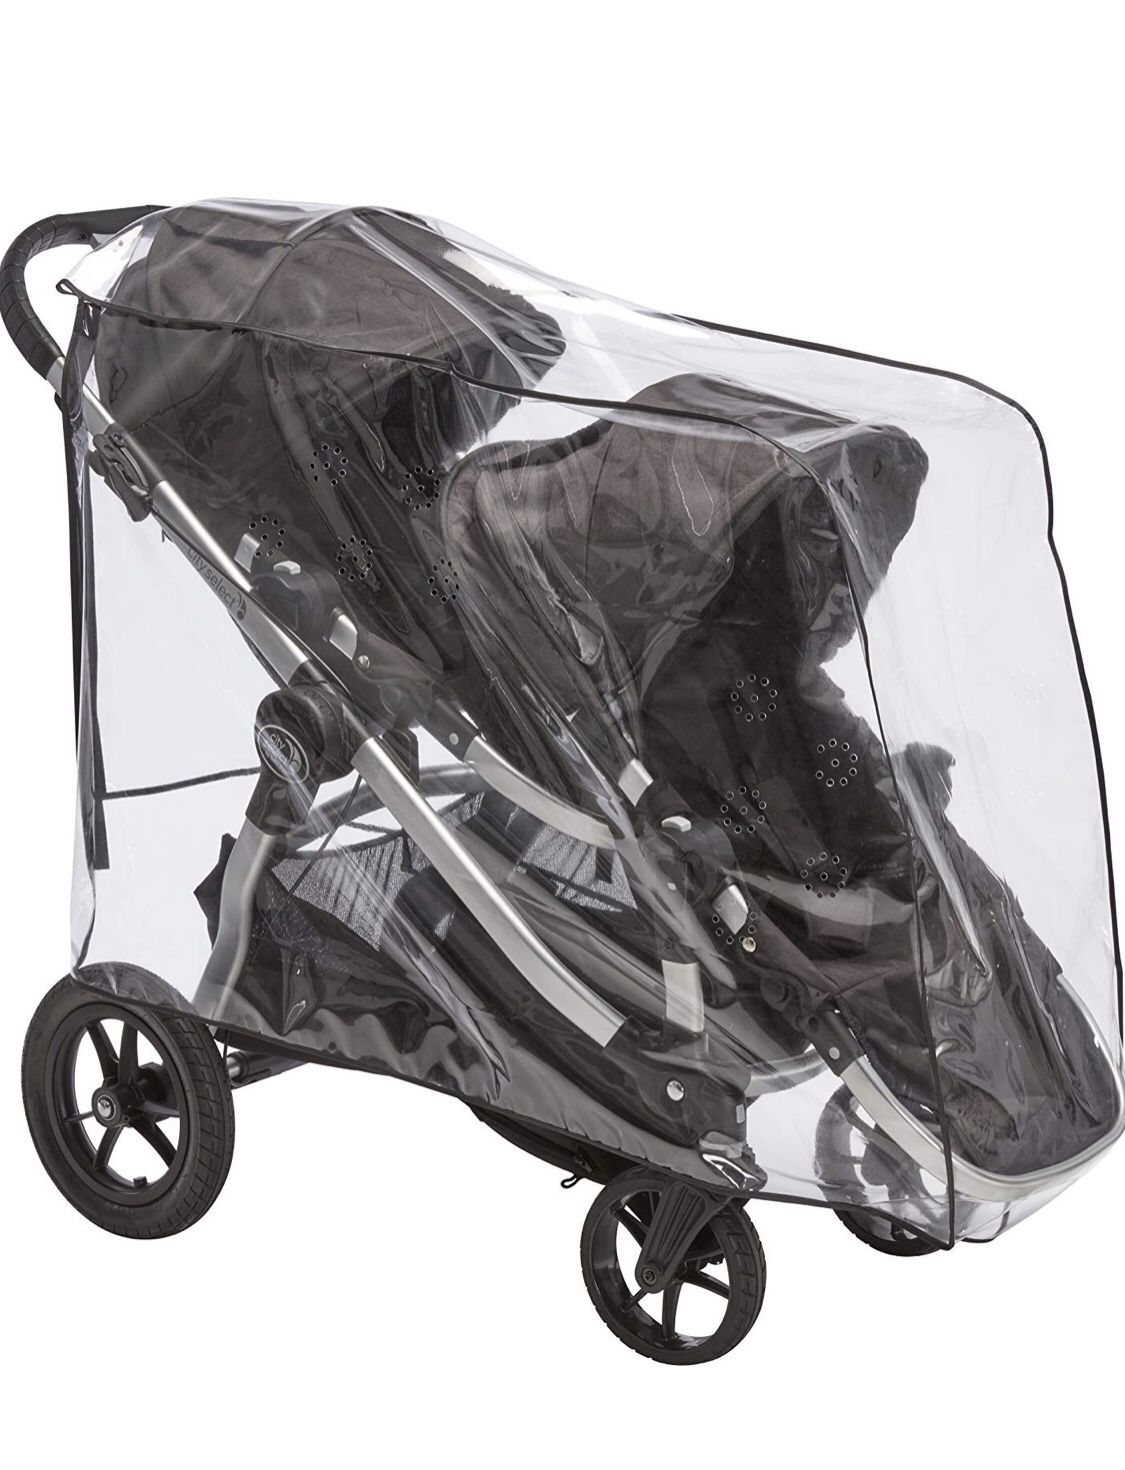 City Select Double Stroller Rain/wind cover